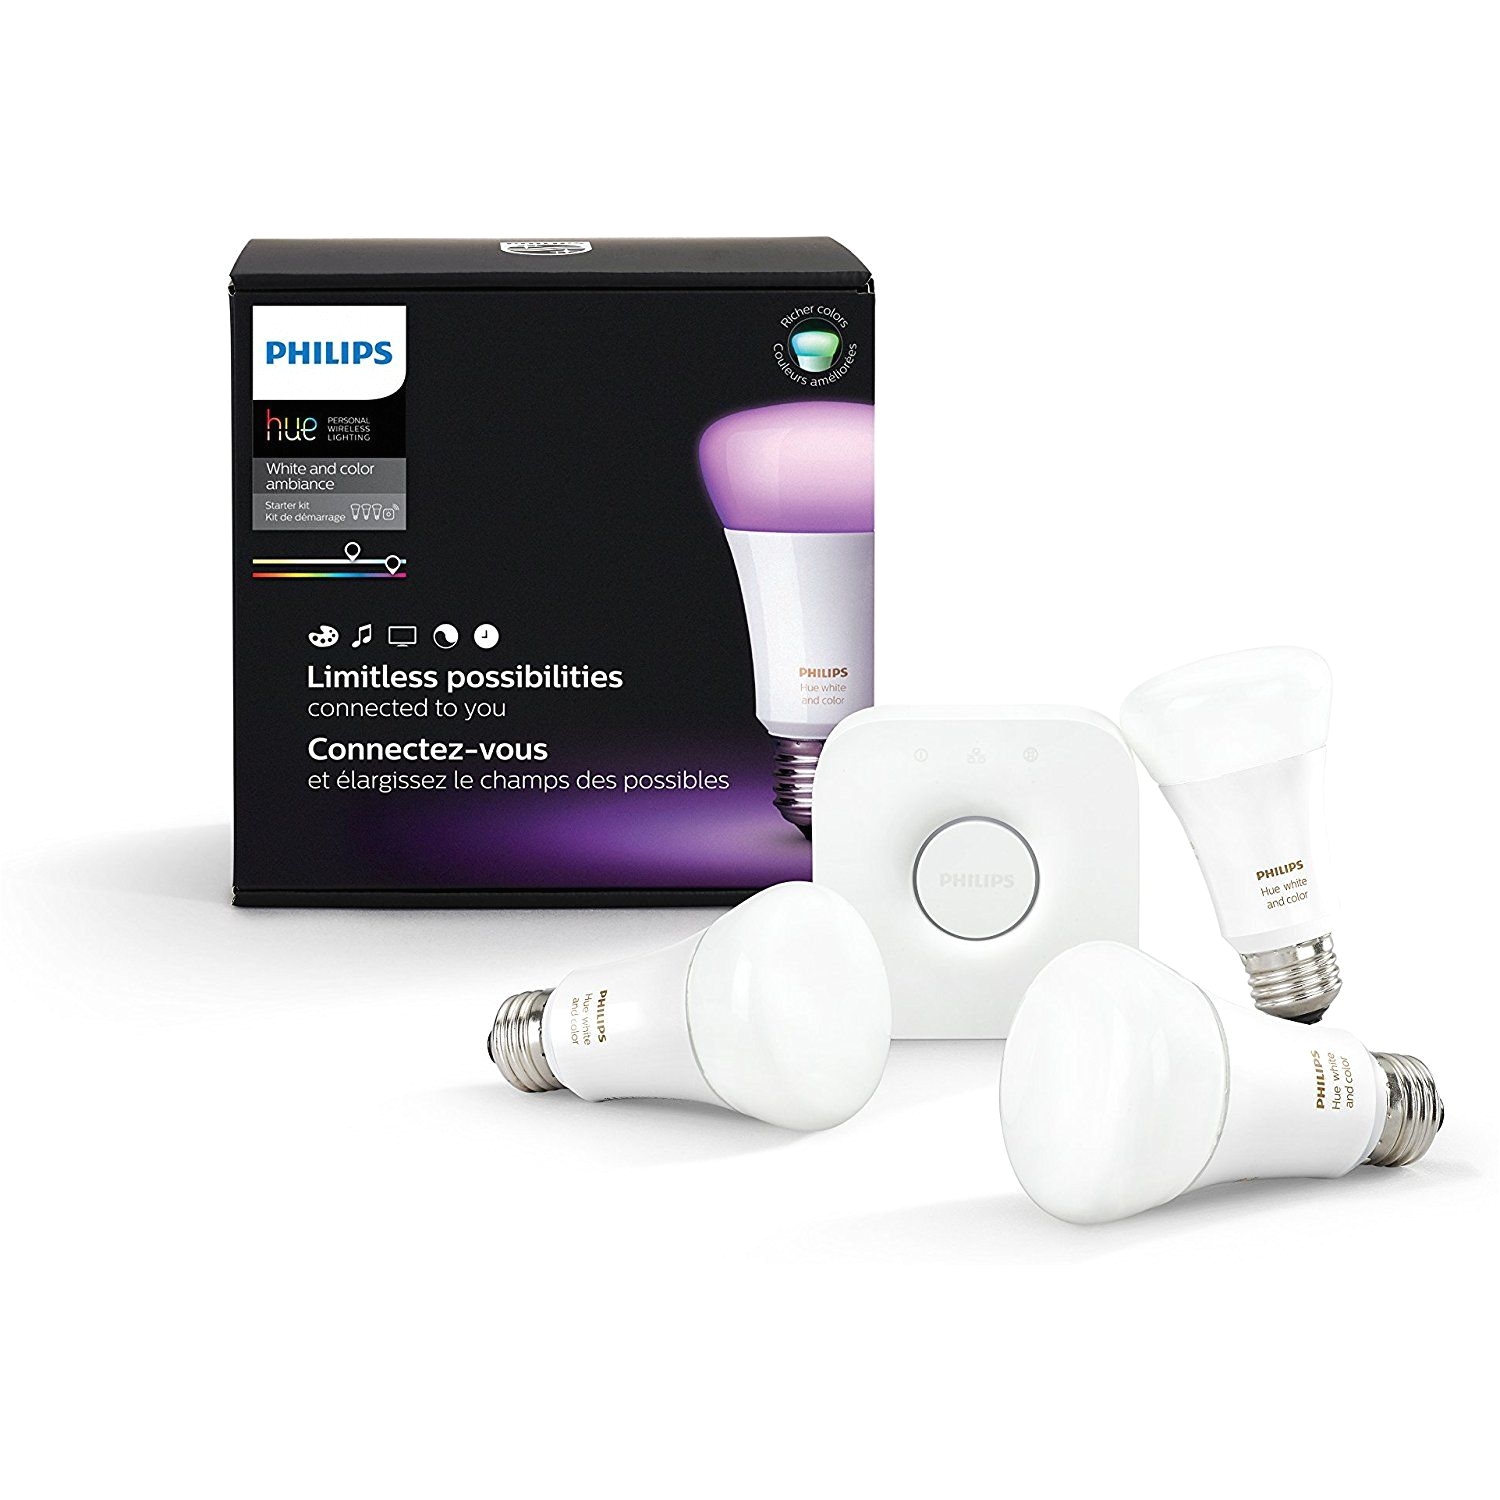 philips hue 464479 60w equivalent white and color ambiance a19 starter kit 3rd generation